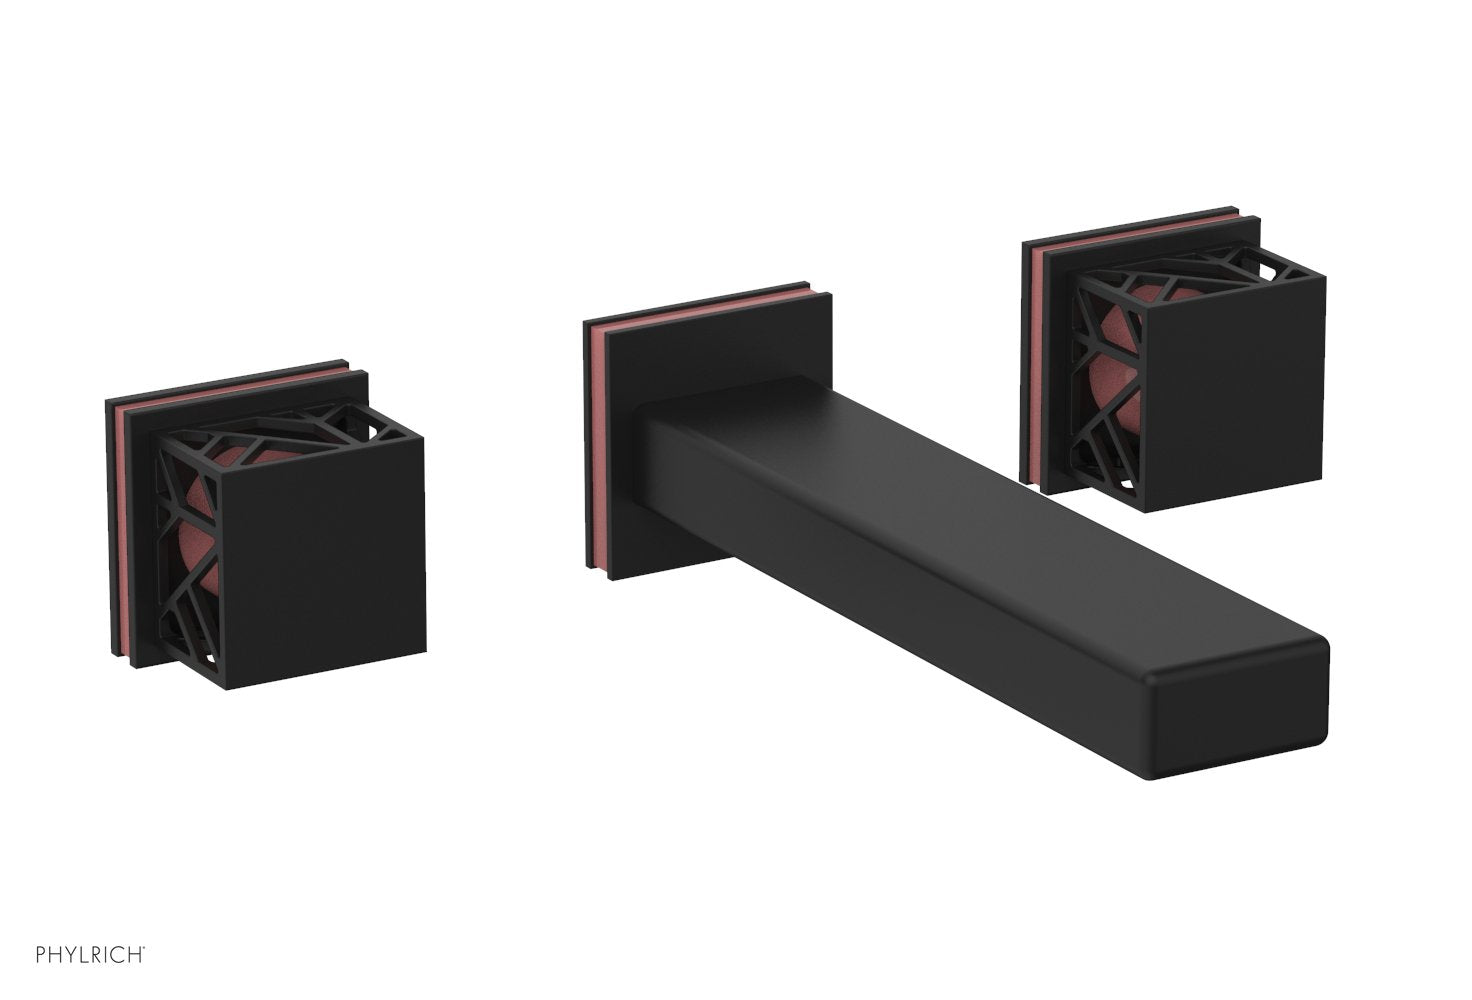 Phylrich JOLIE Wall Lavatory Set - Square Handles with "Pink" Accents